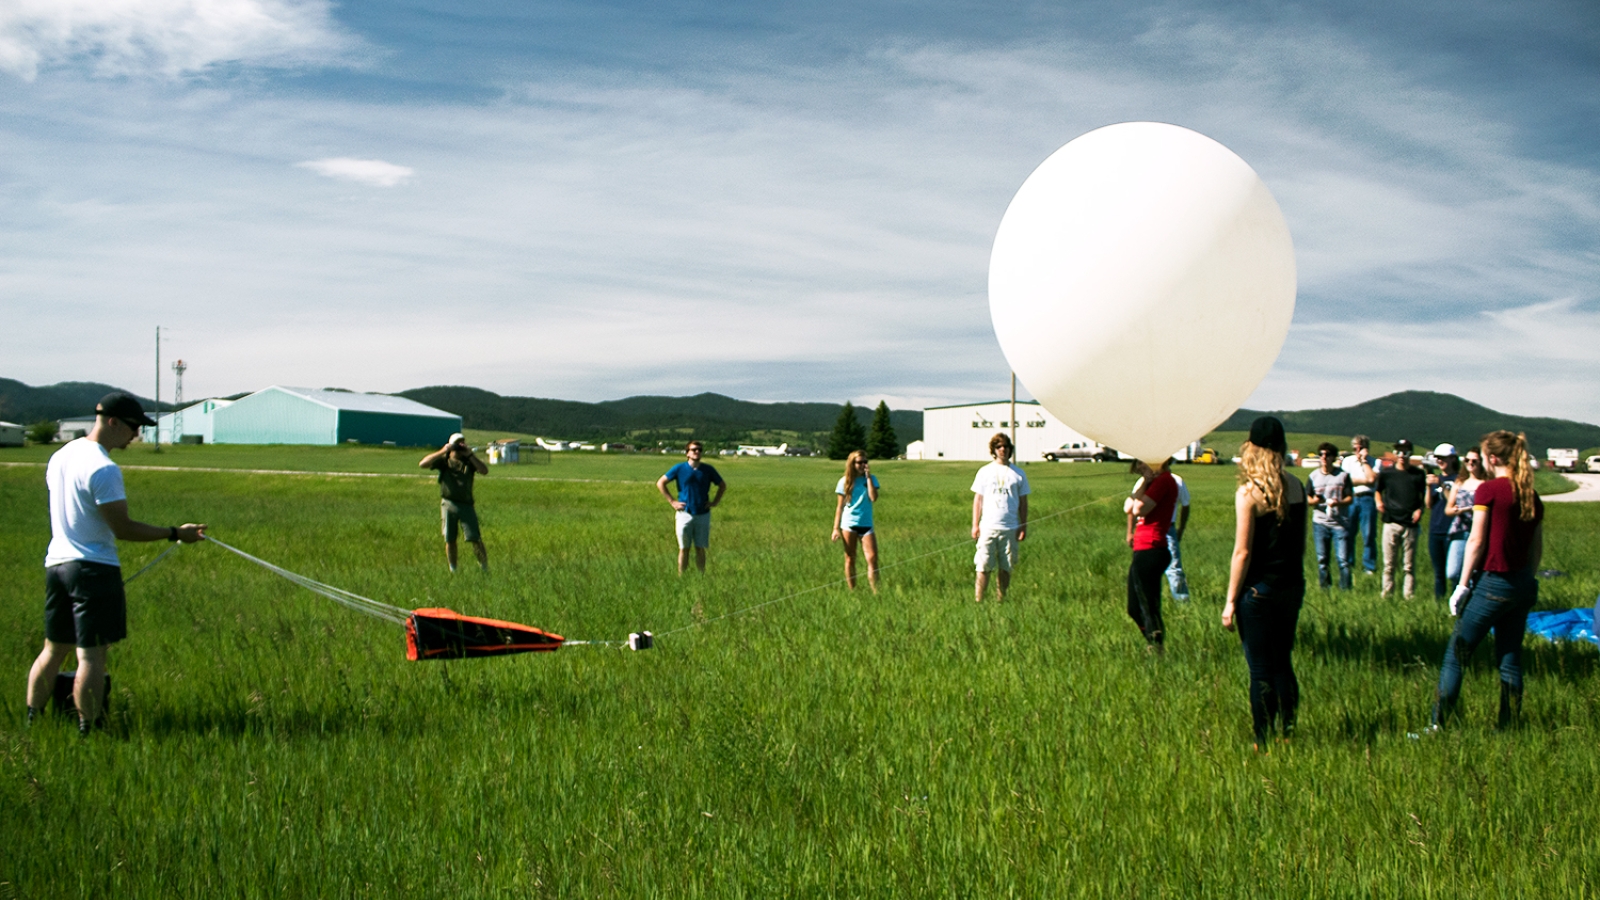 A crowd watches a balloon launch in a field